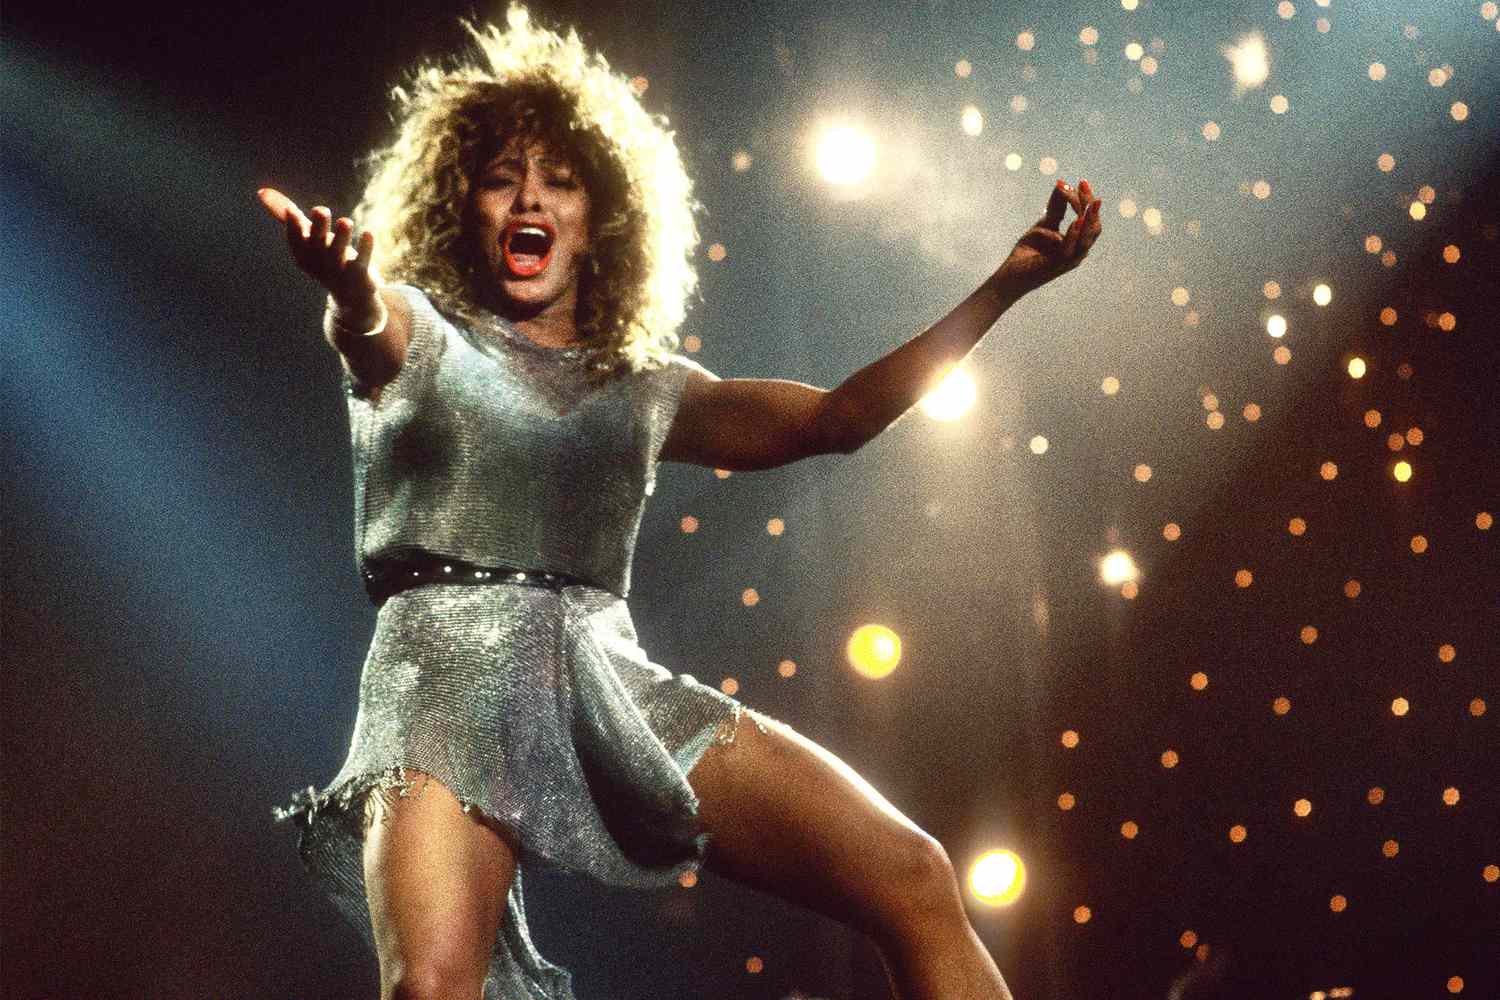 On Tina Turner and what it meant to be the Queen of Rock & Roll